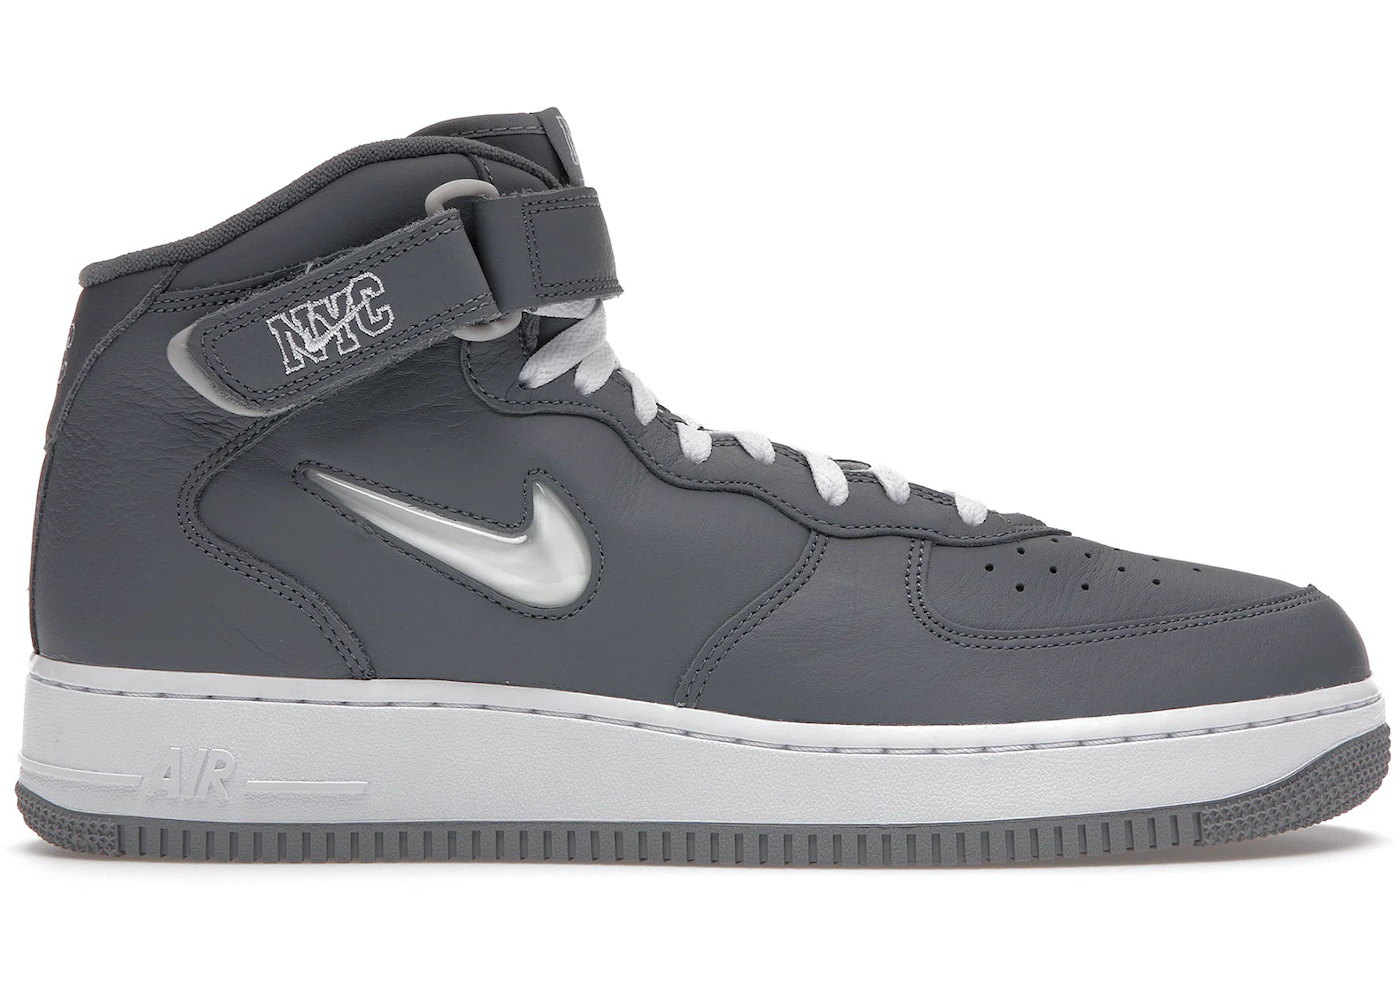 Nike, Air Force 1 Qs Leather High-top Sneakers, Gray